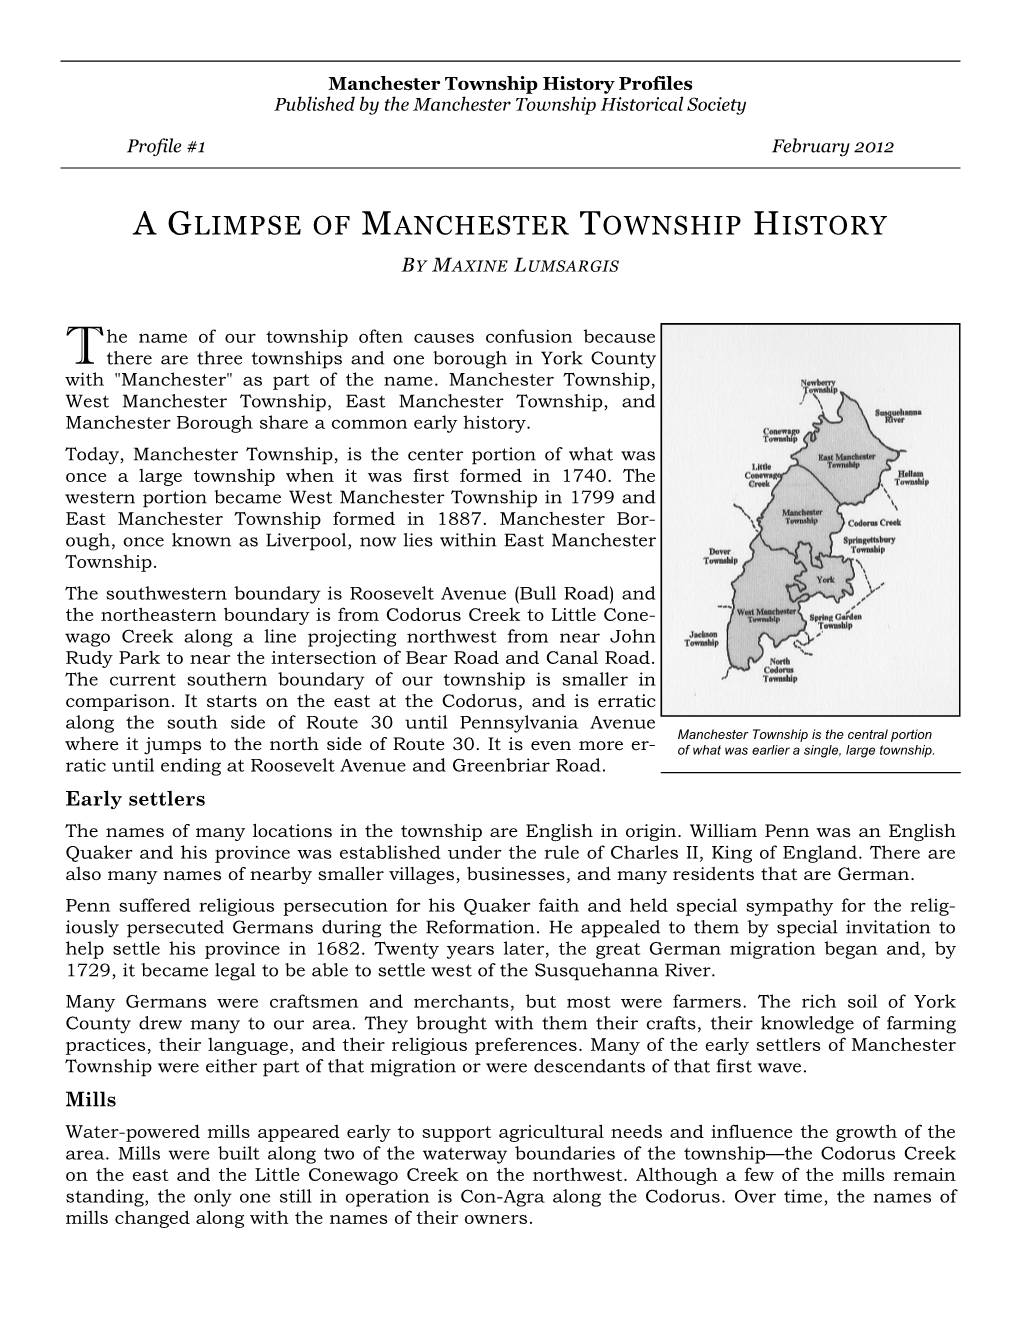 120221 a Glimpse of Manchester Twp History Revised